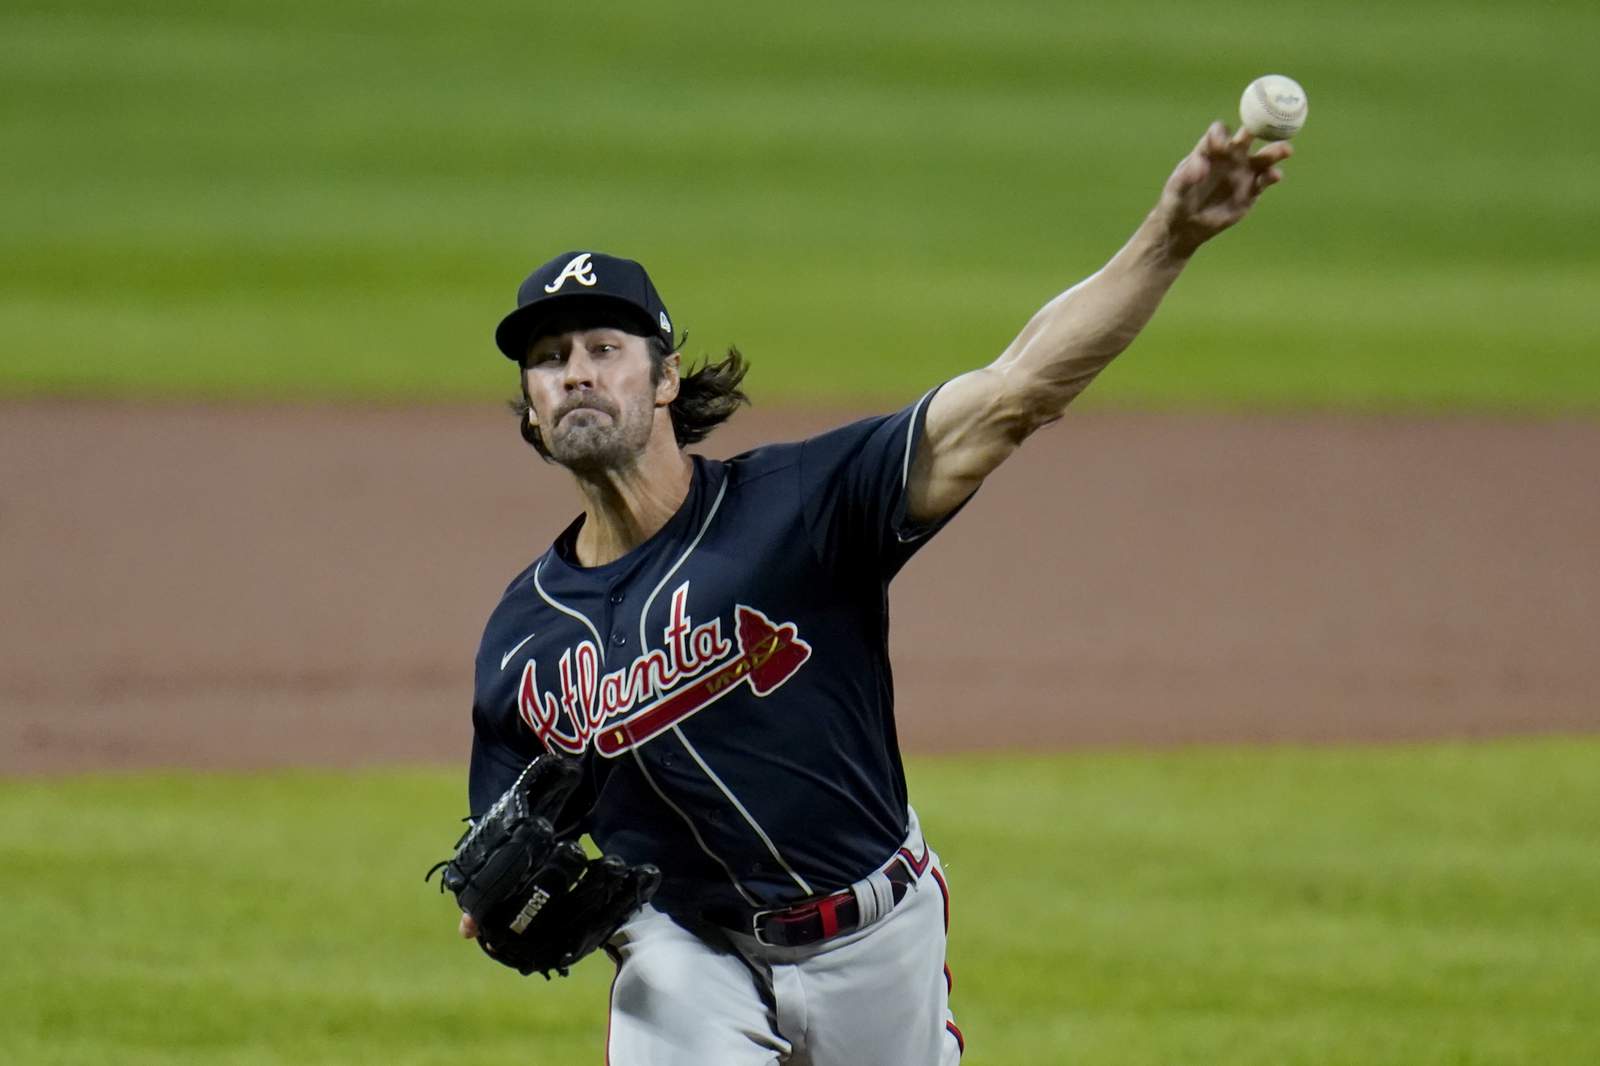 Hamels yields 3 runs in Braves debut, a 5-1 loss to Orioles